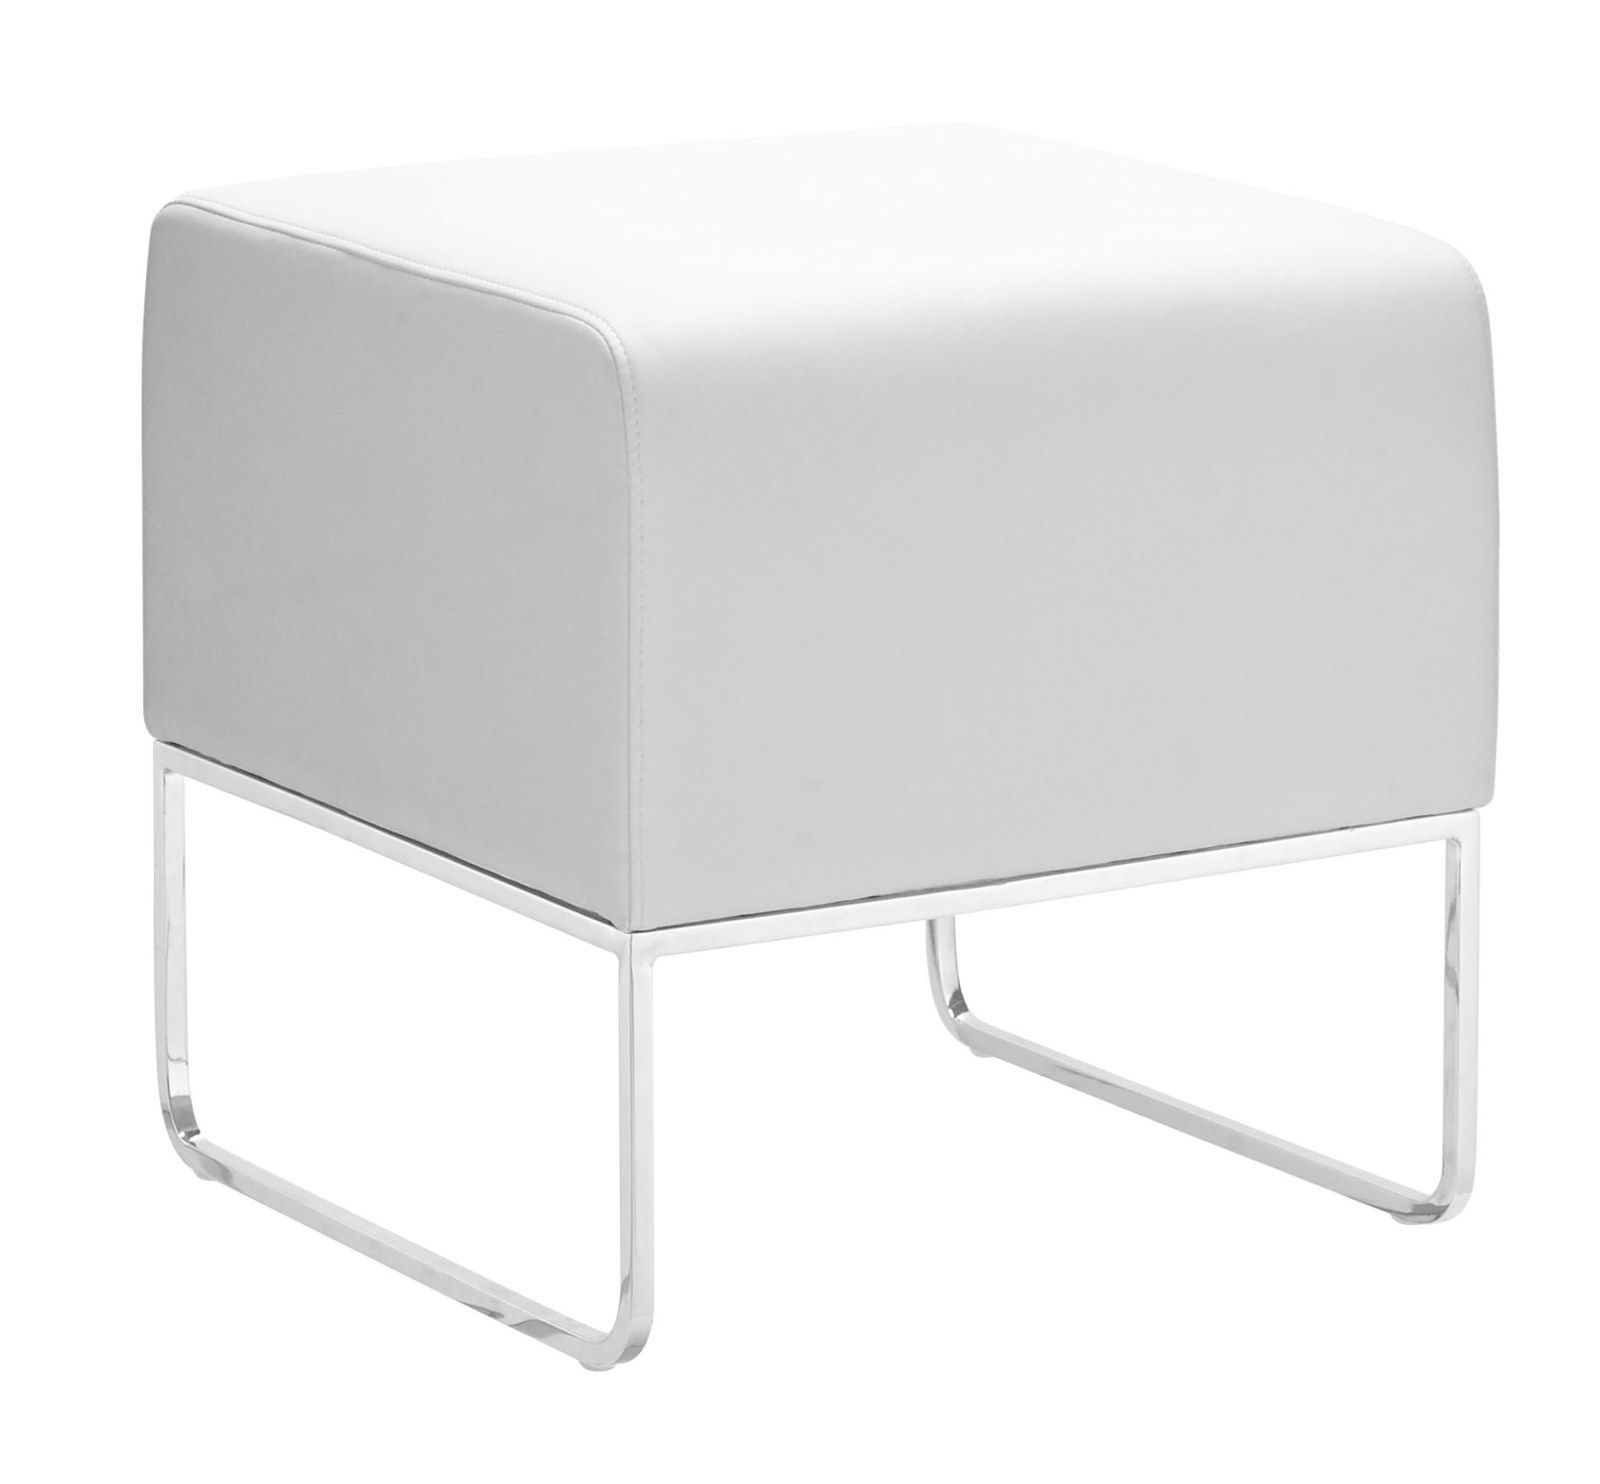 Modern Contemporary Living Room Ottoman, White Leatherette Chrome Steel Pertaining To Chrome Metal Ottomans (View 17 of 20)